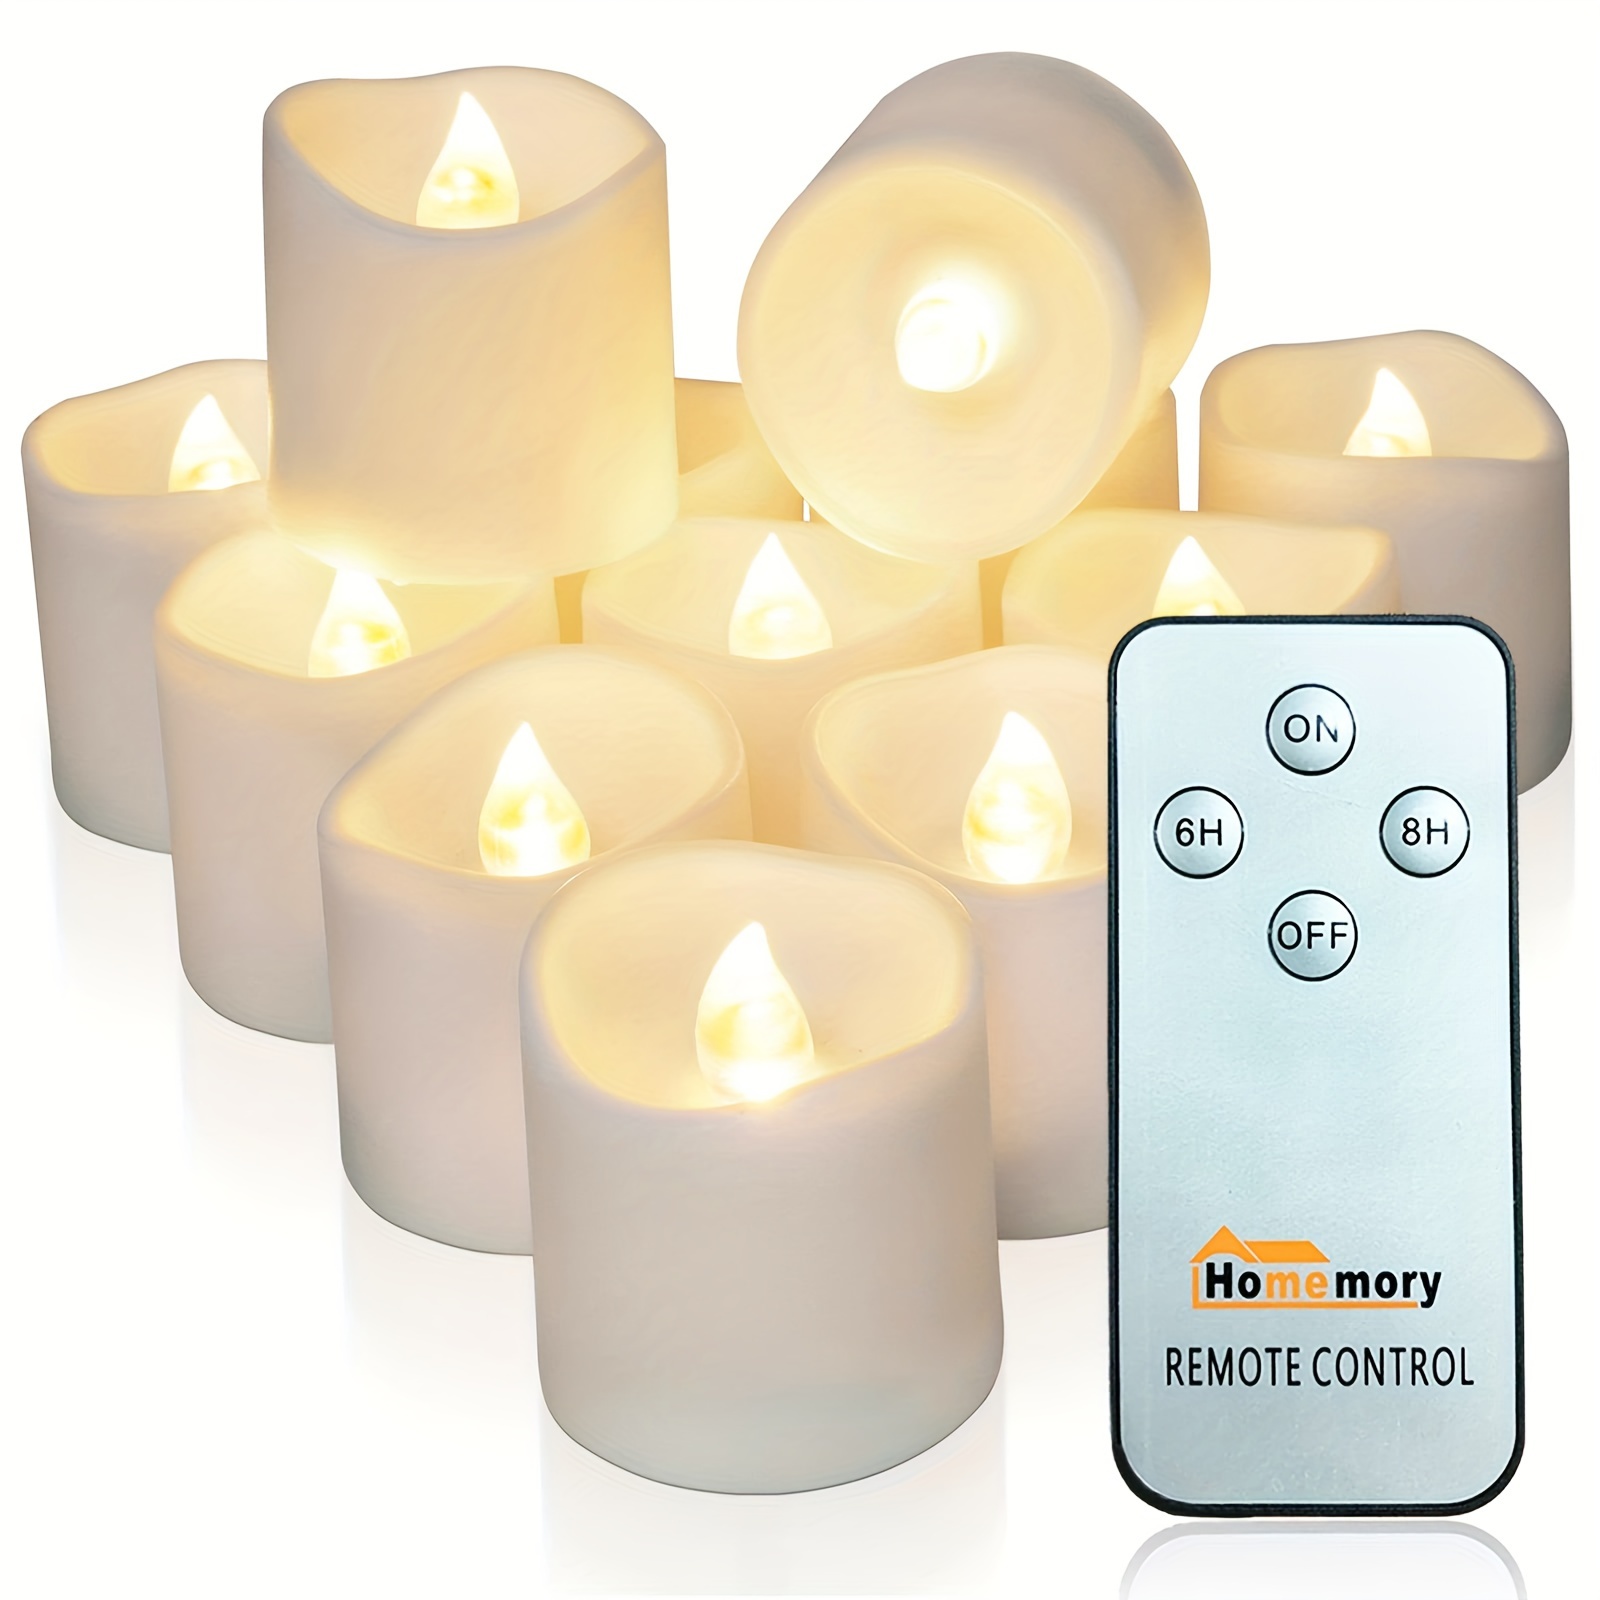 

24pcs Timer Remote Control Flameless Led Votive Candles, 1.5" X 1.6" Long Lasting Battery Operated Tea Light, Electric Fake Candles In Warm White For Wedding, Festival Celebration Decor